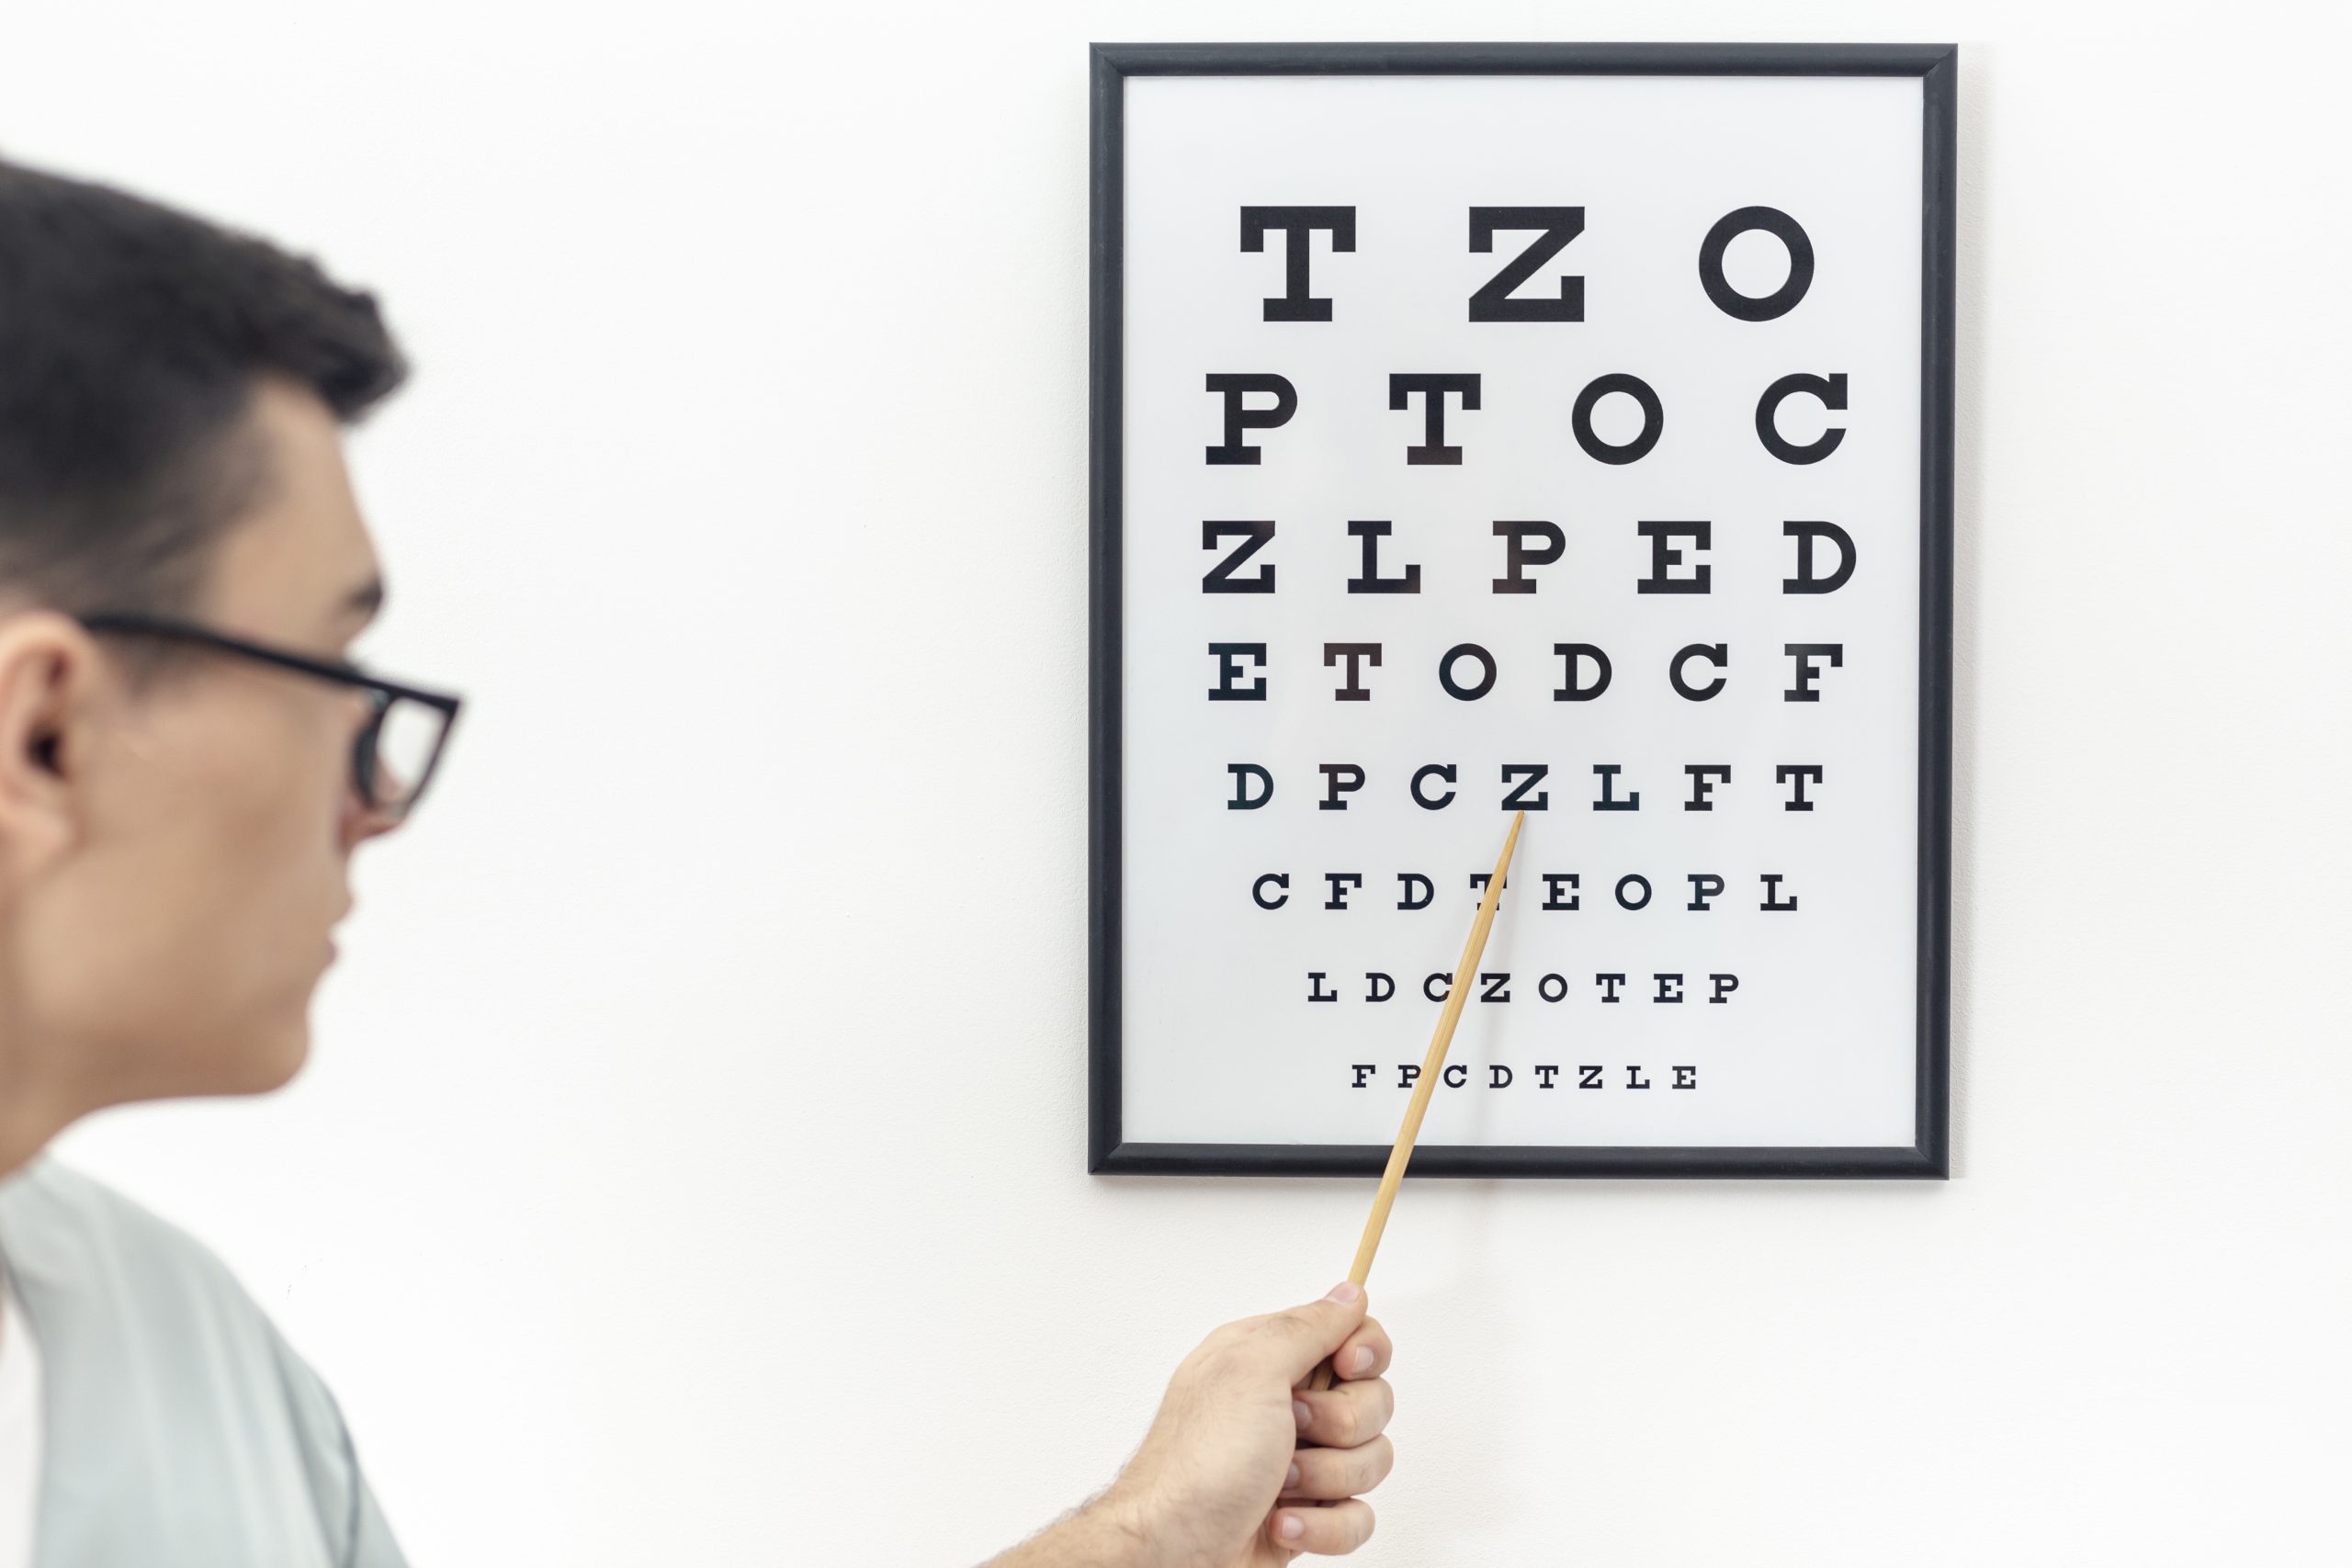 Vision Impairment Definition and Meaning